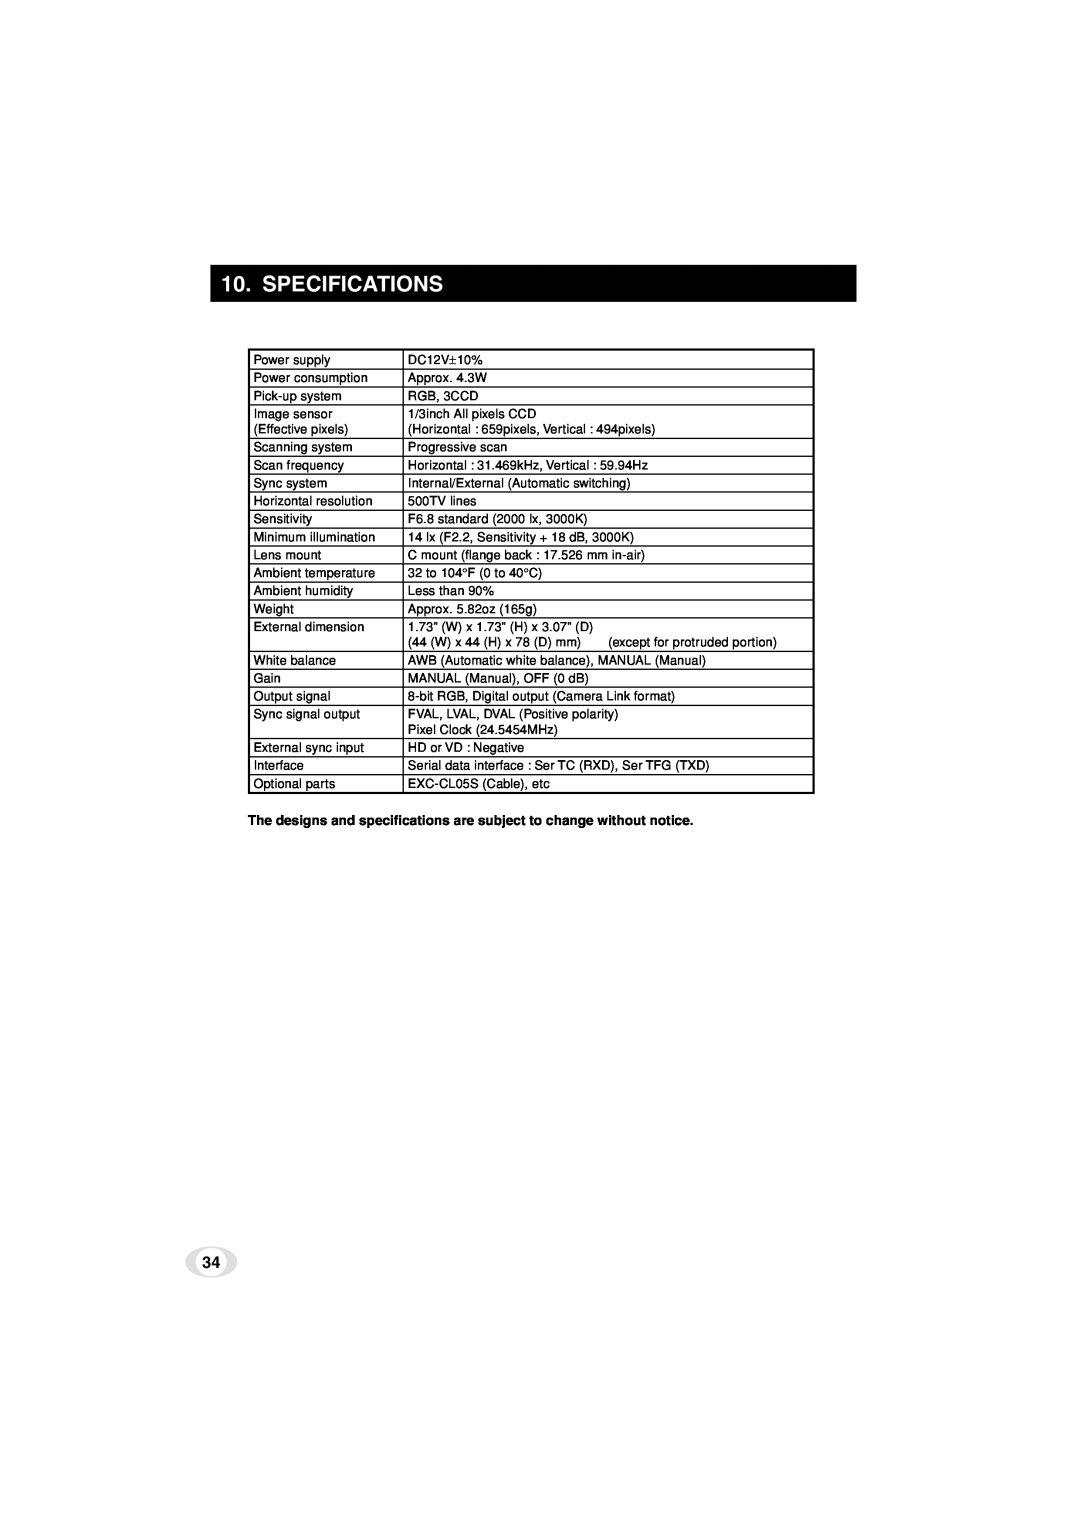 Toshiba IK-TF5C instruction manual Specifications, The designs and specifications are subject to change without notice 